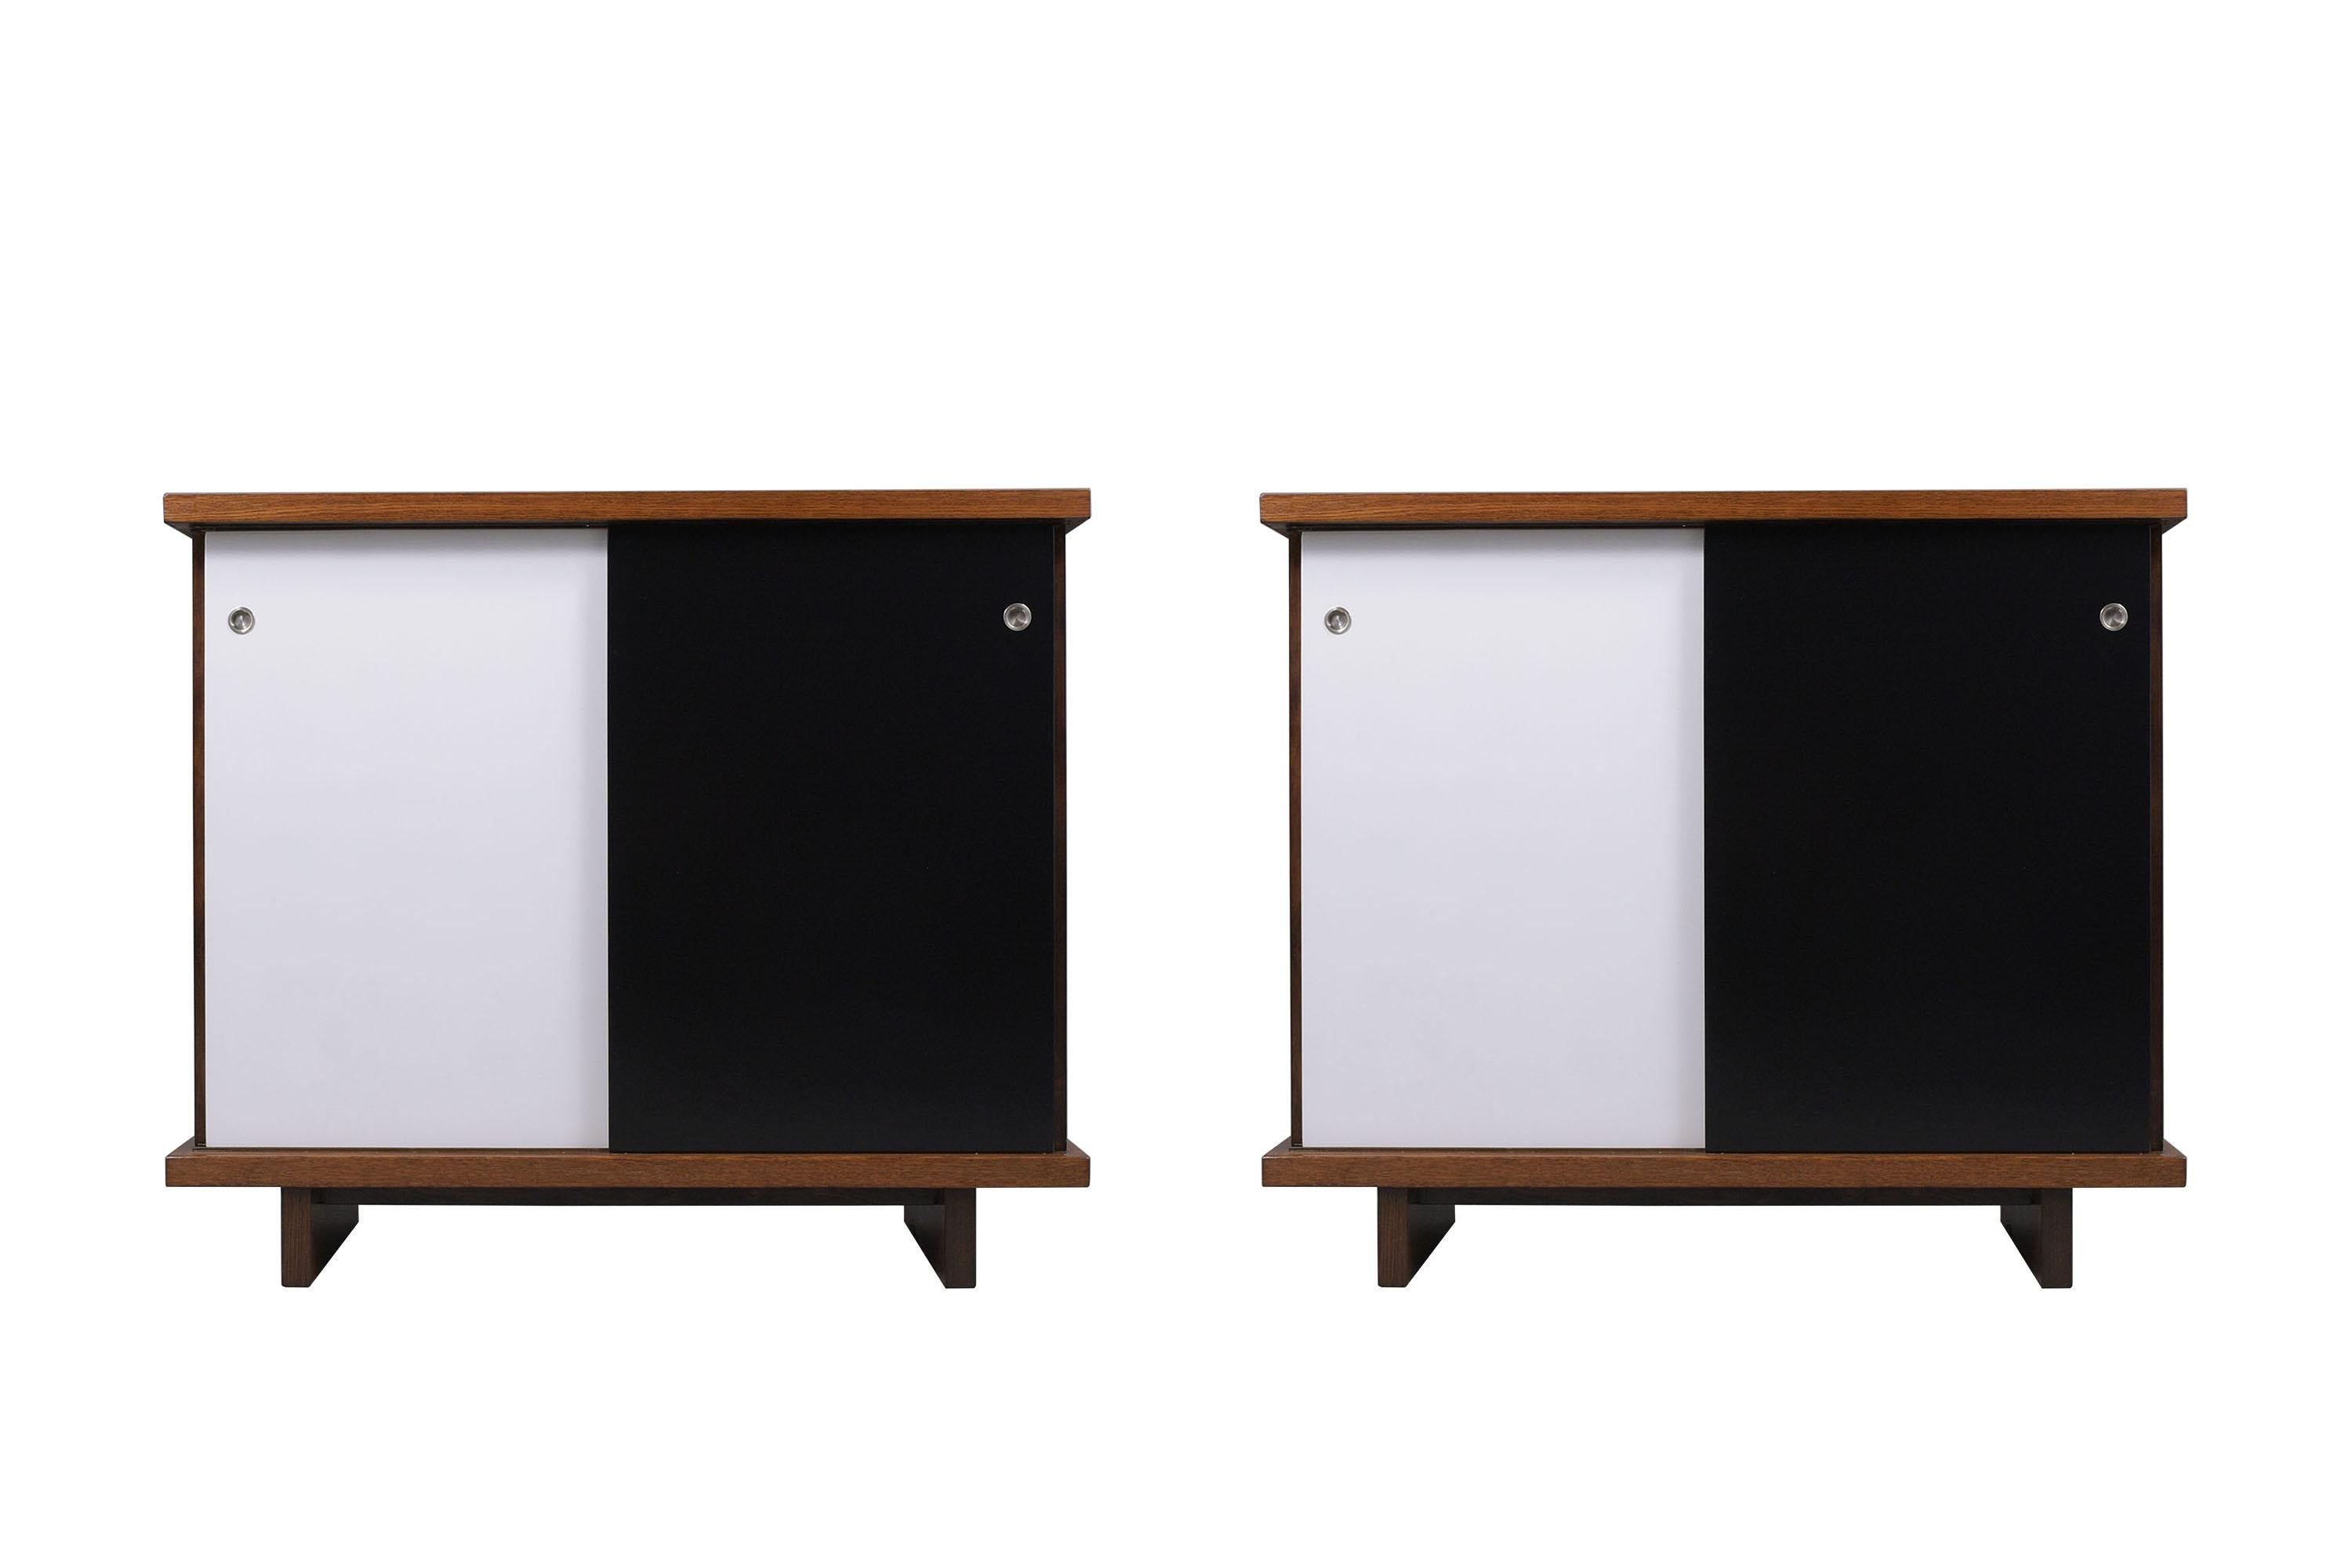 An extraordinary pair of 1960's mid-century American of Martinsville cabinets hand-crafted out of wood are in great condition and have been fully restored by our professional craftsmen team in the house. These pieces feature a walnut white and black